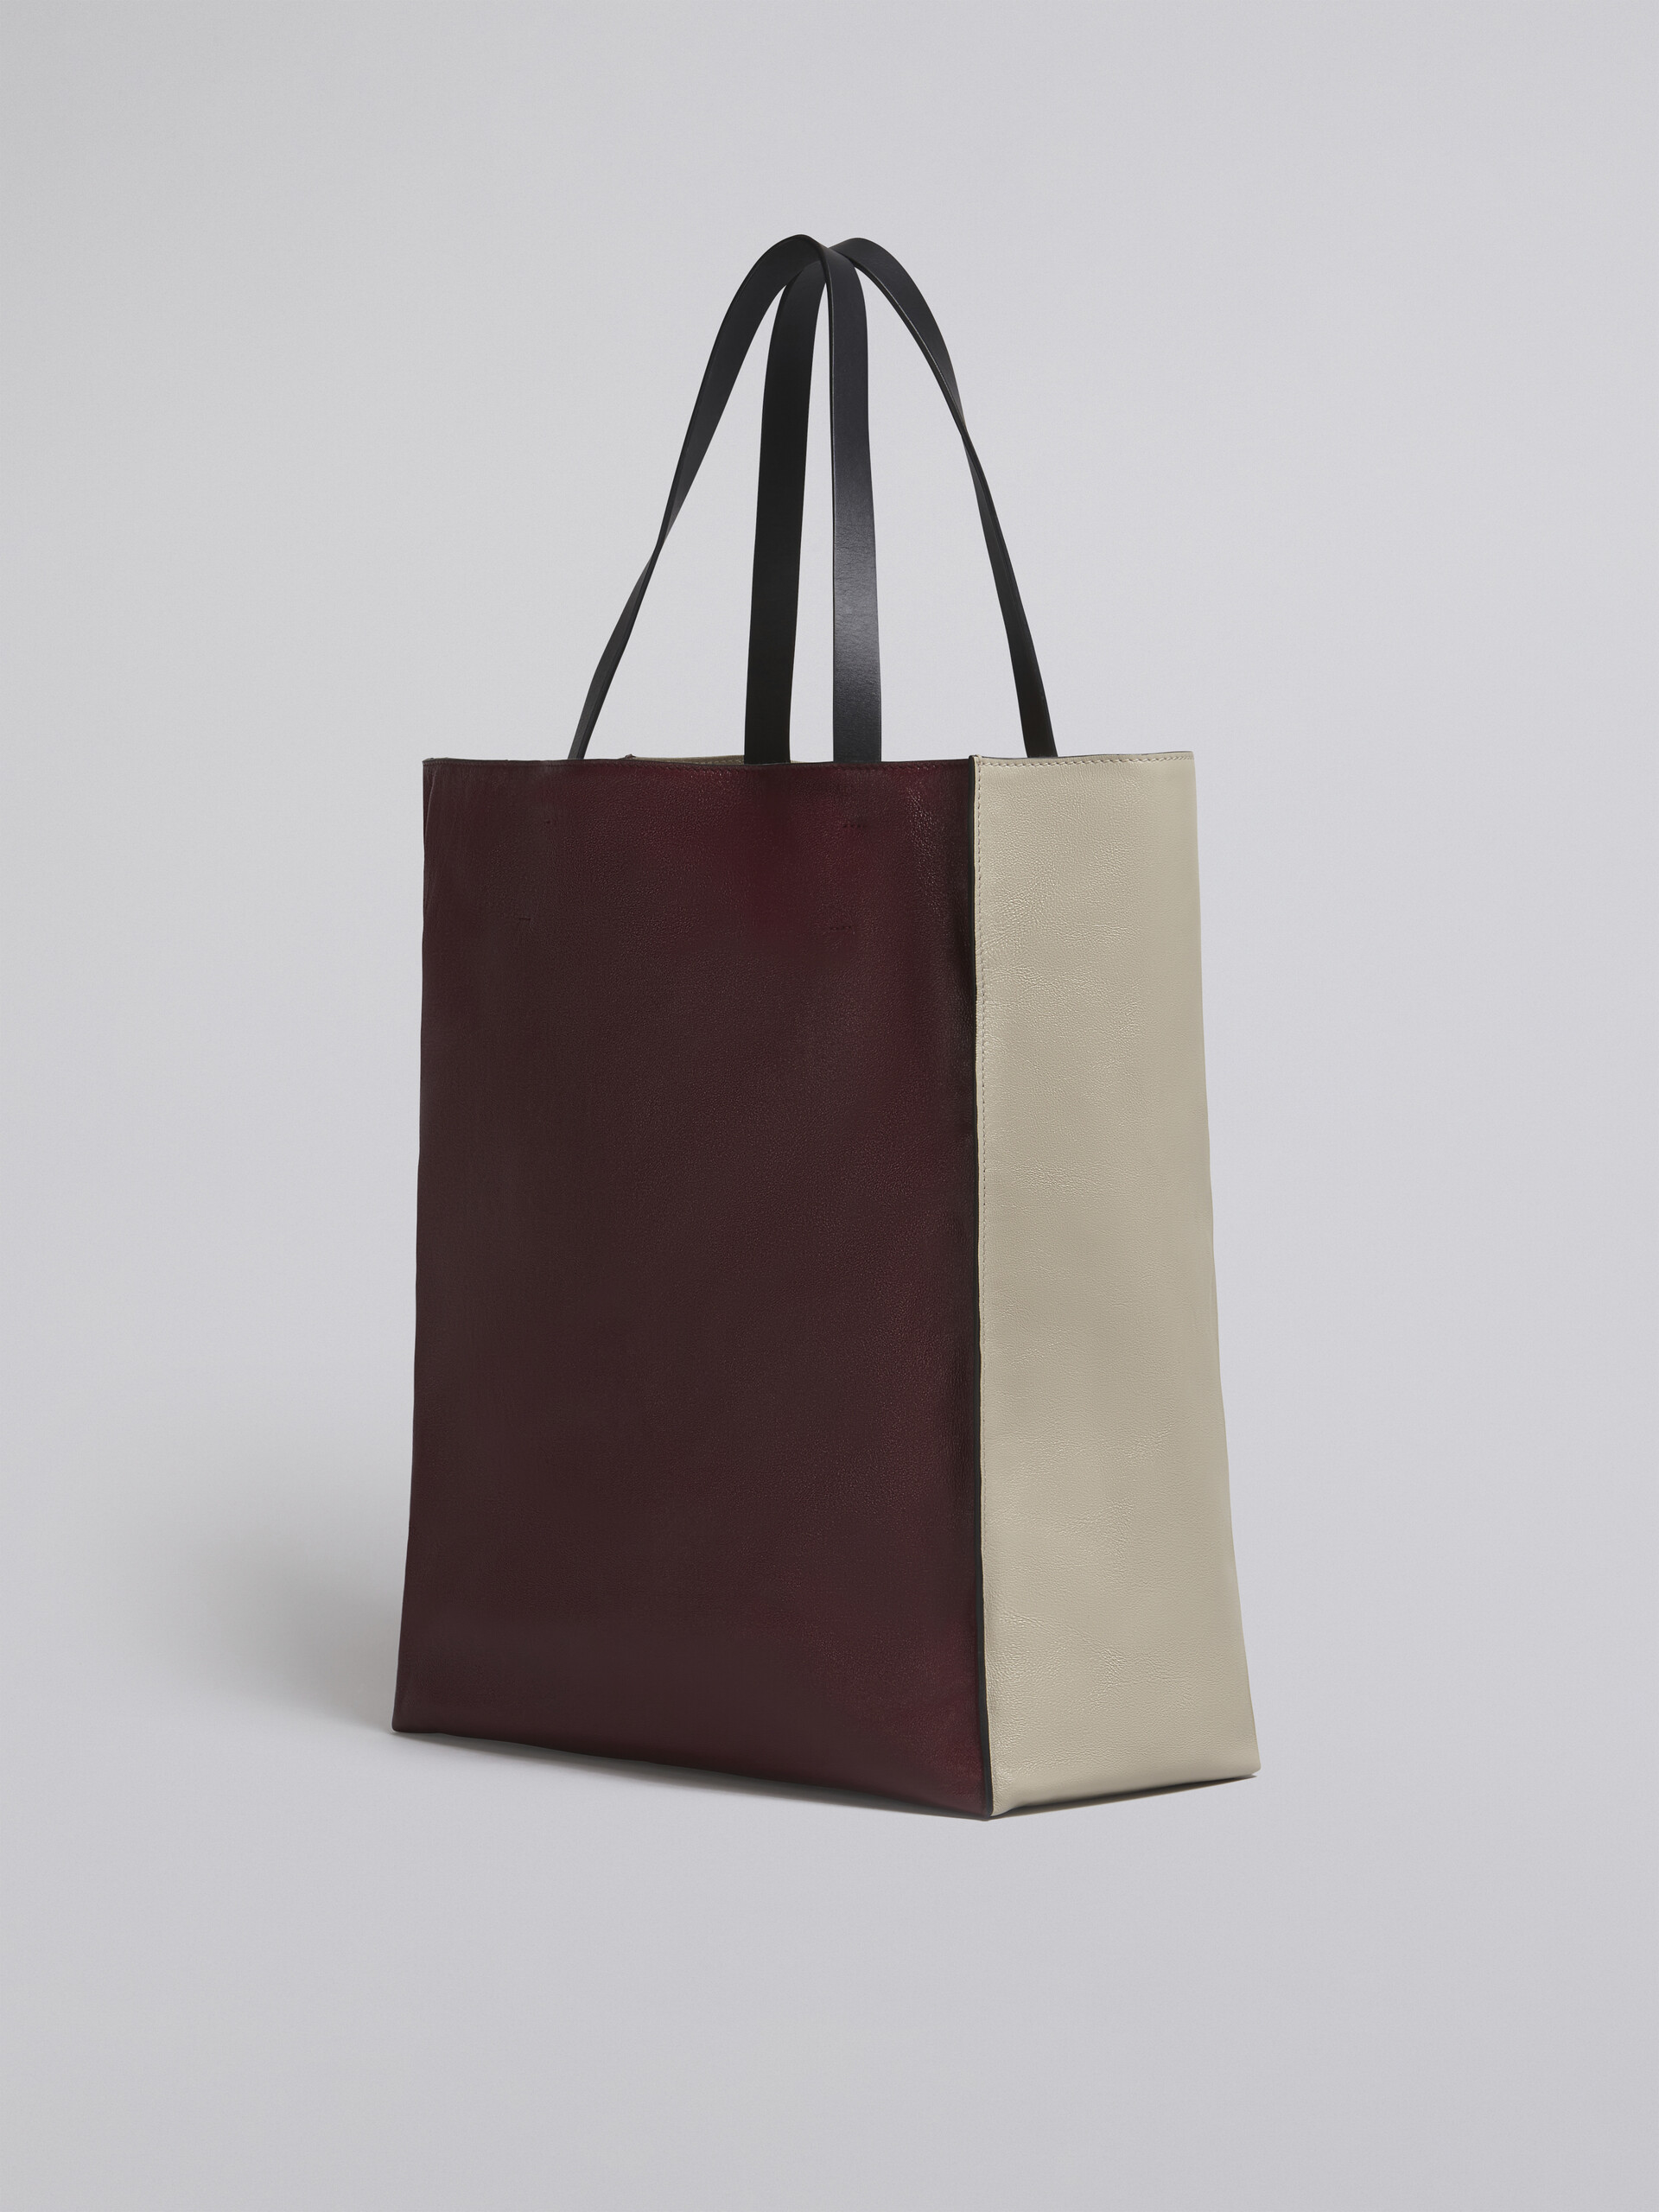 MUSEO SOFT large bag in white and red leather - Shopping Bags - Image 3